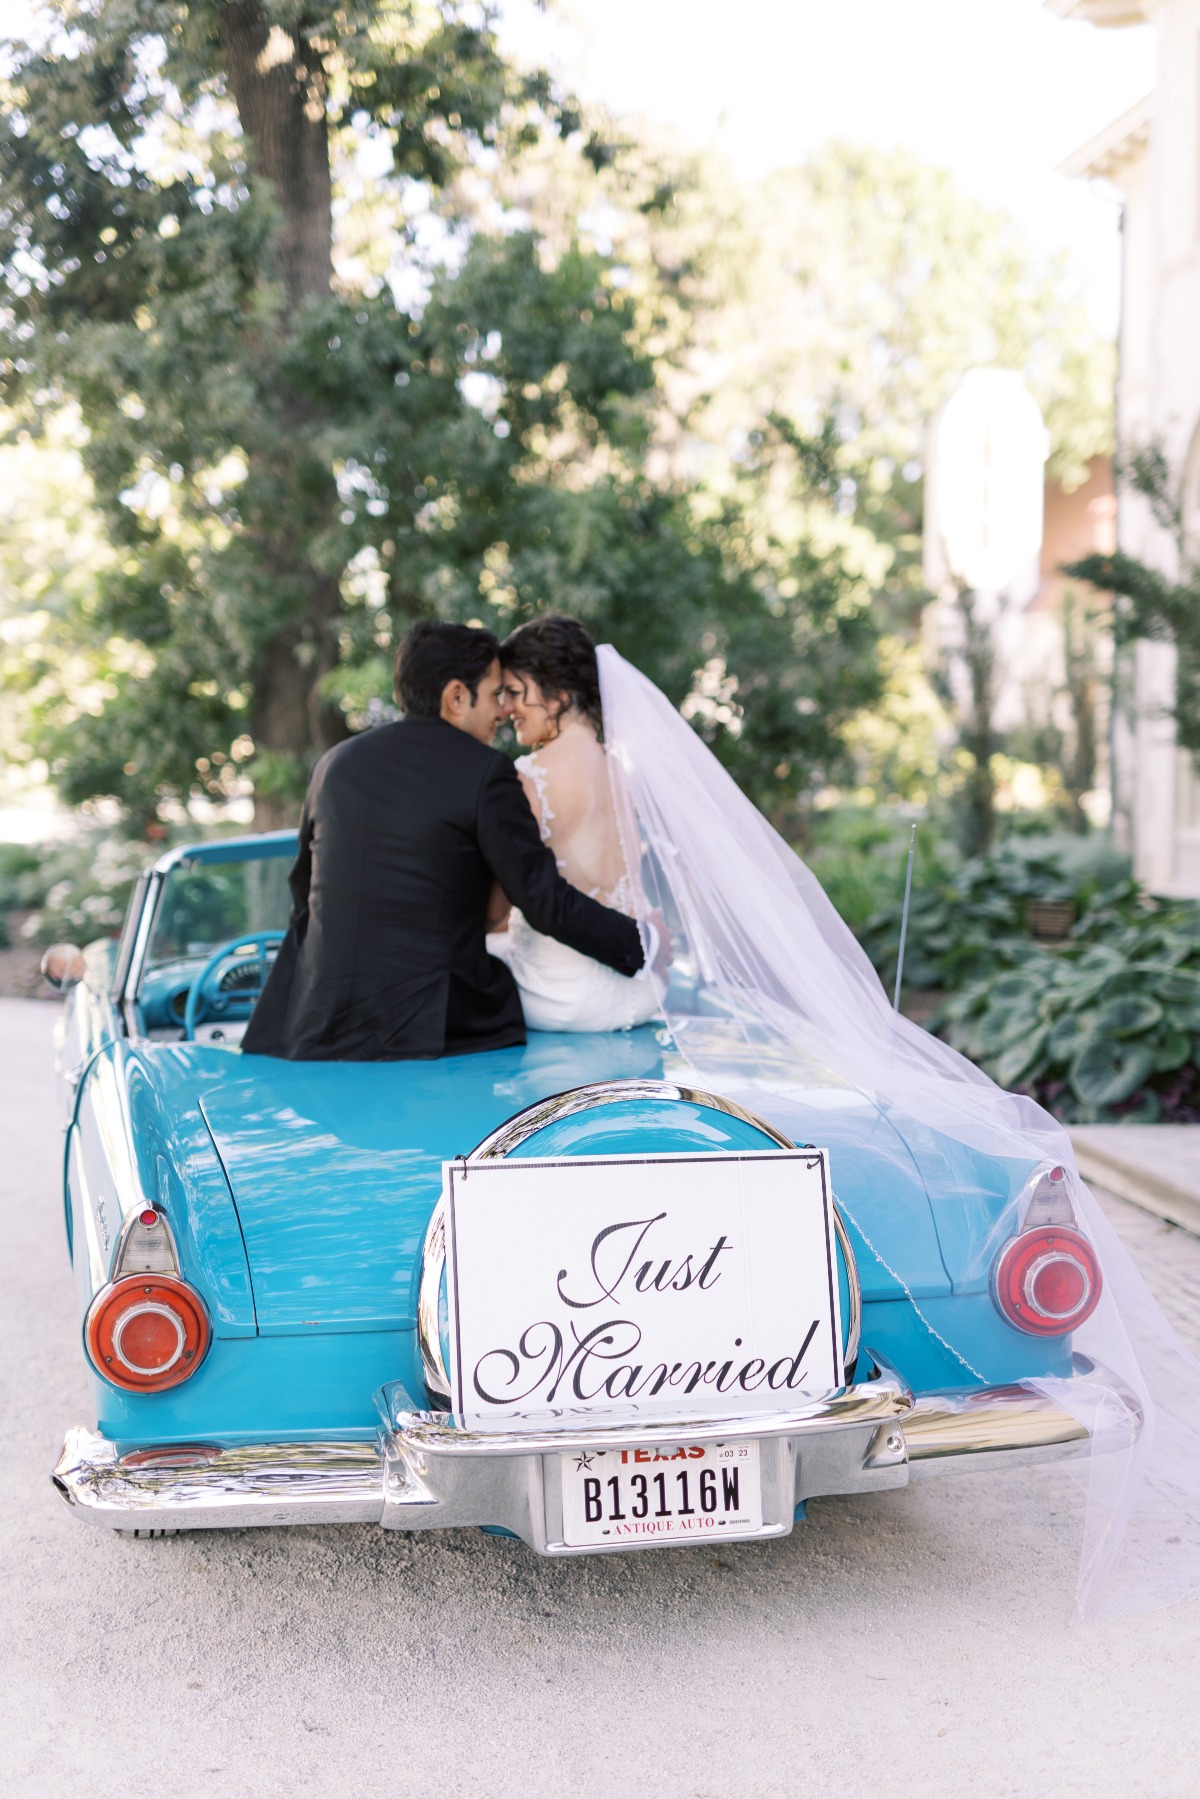 Bride and groom on car with just married sign